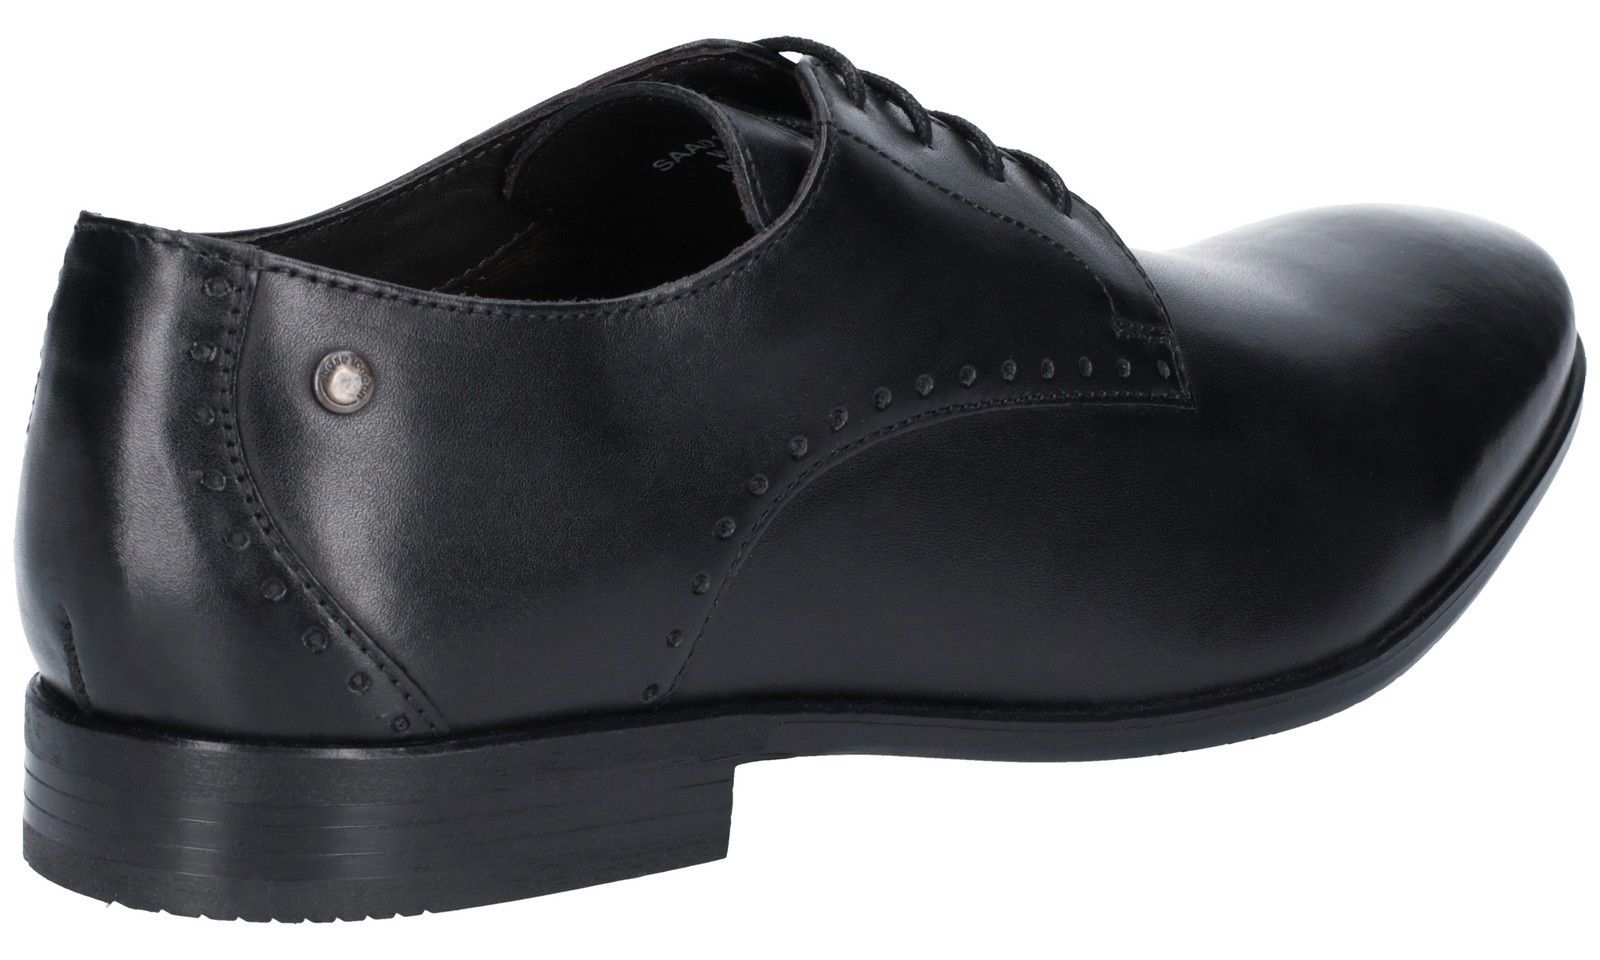 Westbury is a chiseled tip plain toe derby from the Concierge collection. A non-fussy design with simple but eye-catching hole punch detailing on the side panelling. Its rubber sole provides a confident step and is perfect for that smart occasion. Hole Punch Details. 
Formal Styling.